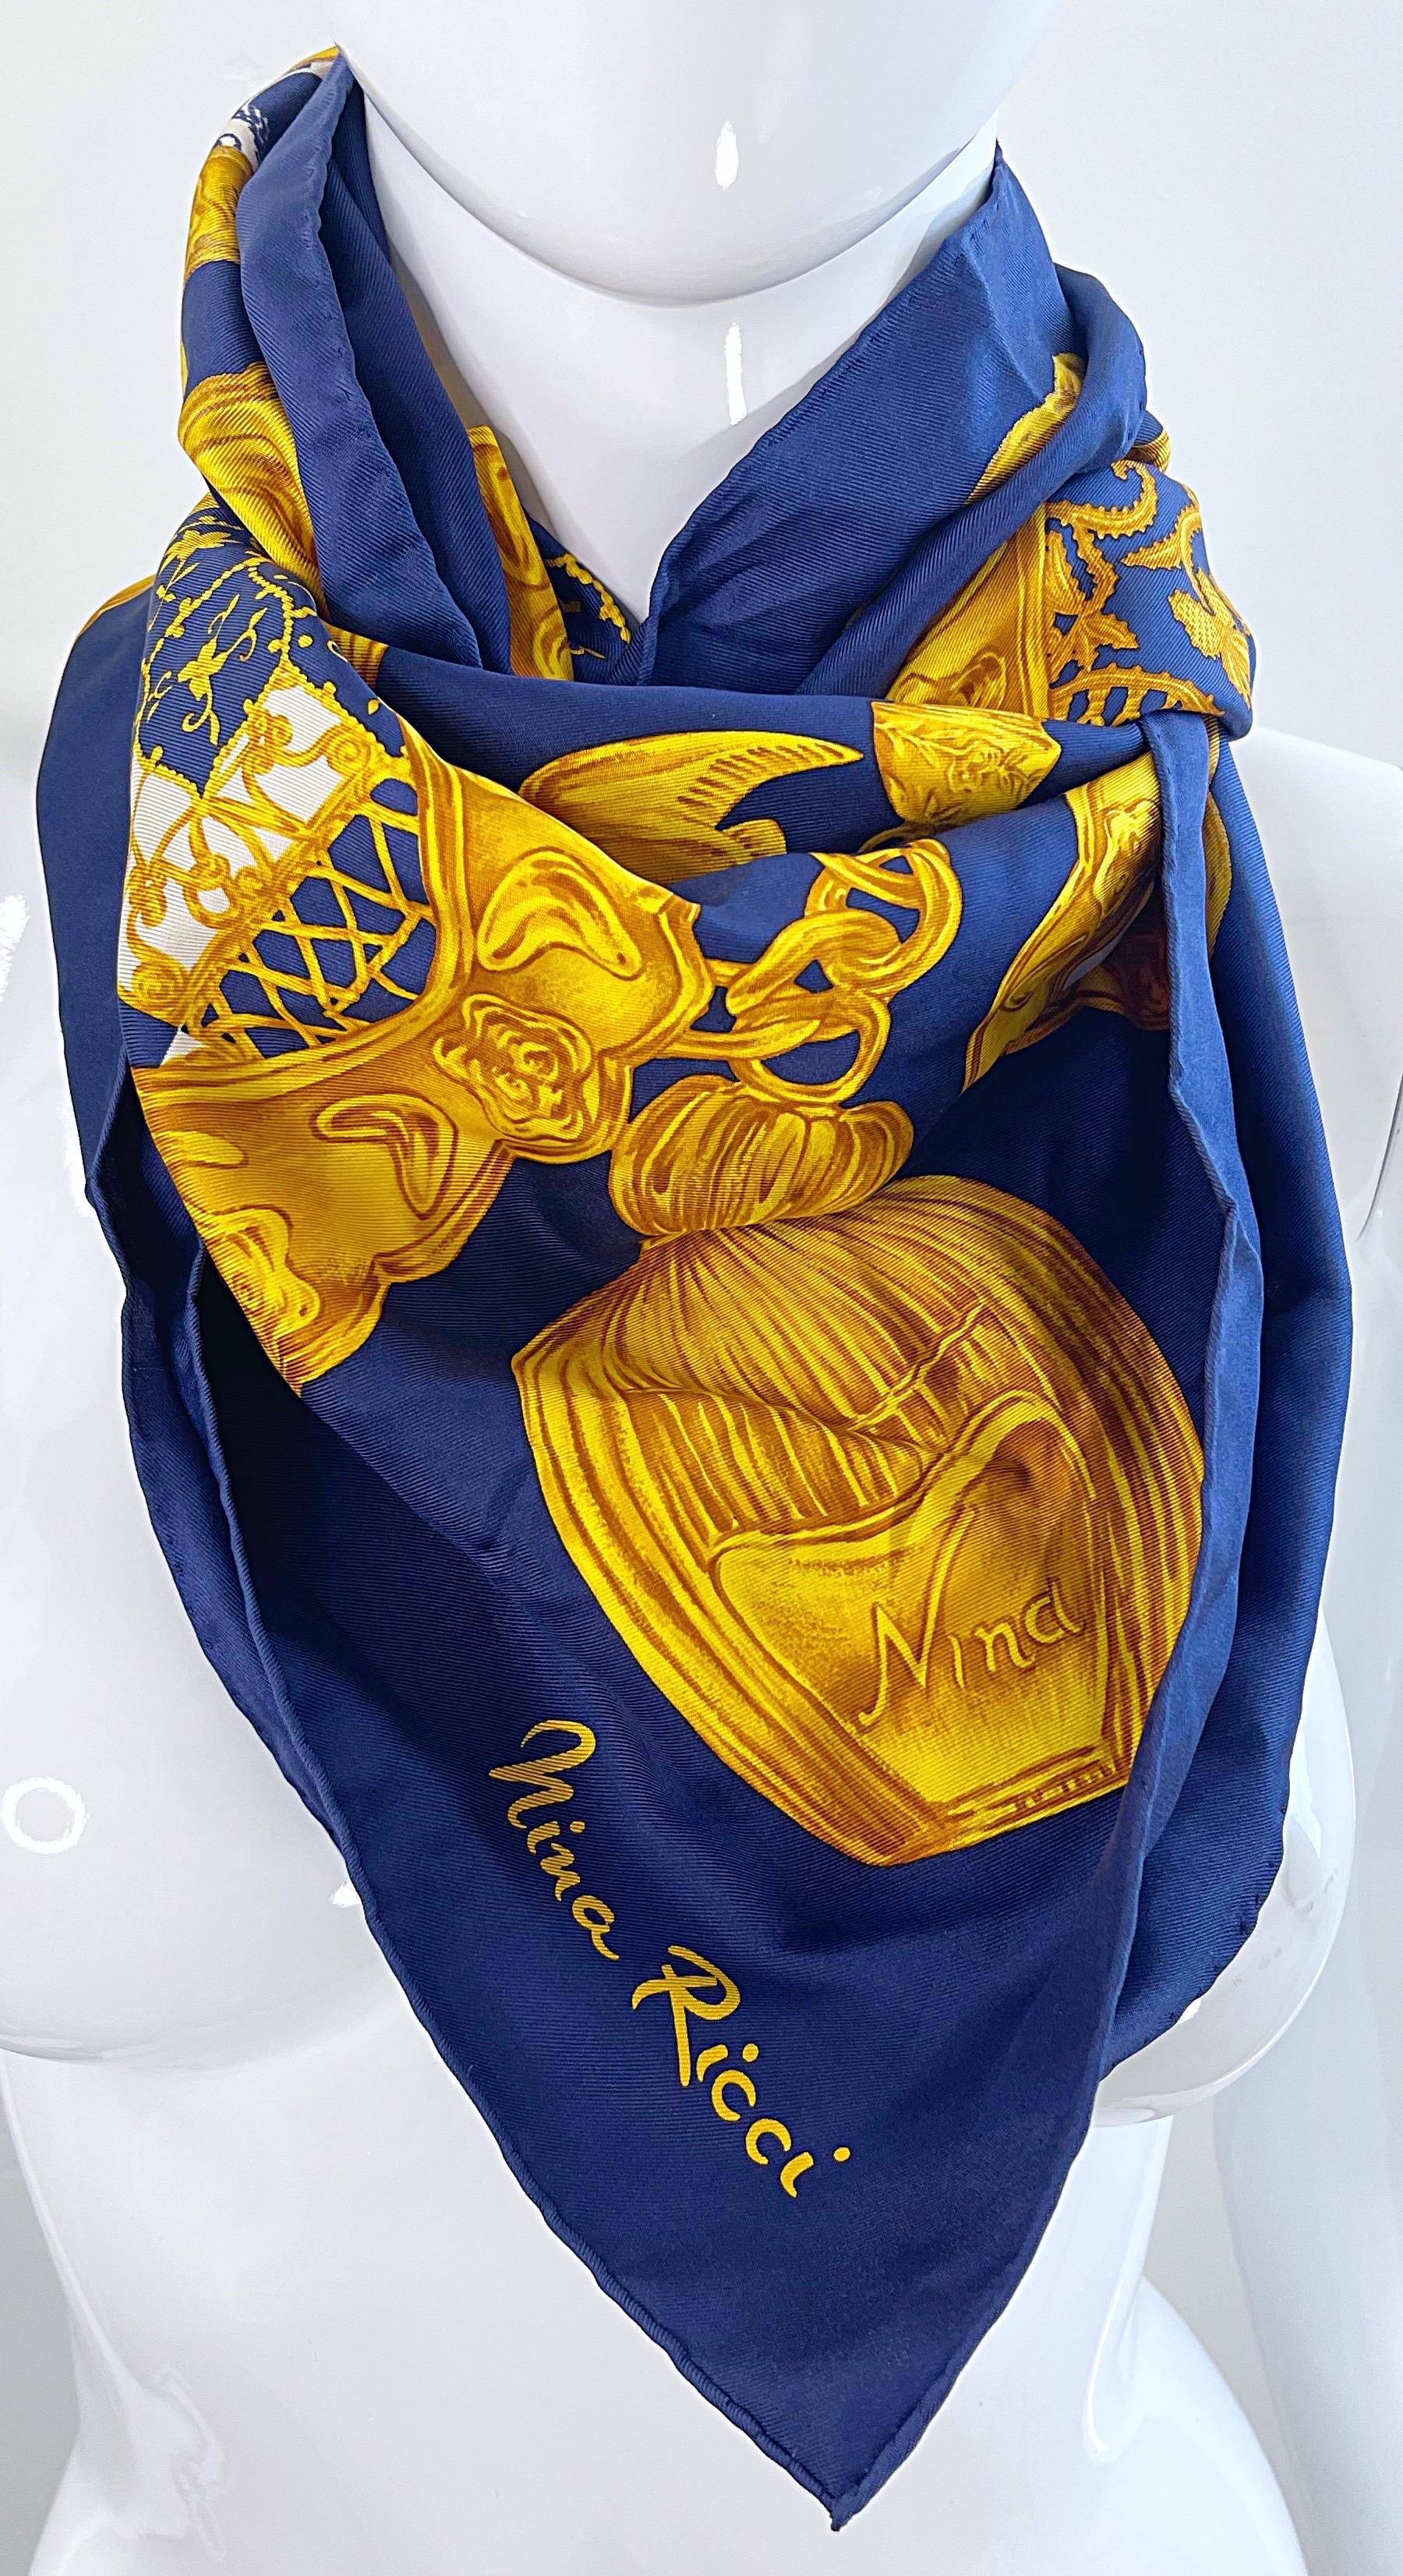 Chic vintage NINA RICCI navy blue, gold and white novelty charm bracelet print large silk scarf. Can be worn a number of ways. Draped over the shoulders, as a had scarf, or wrapped around the neck. The perfect accessory that can instantly bring any